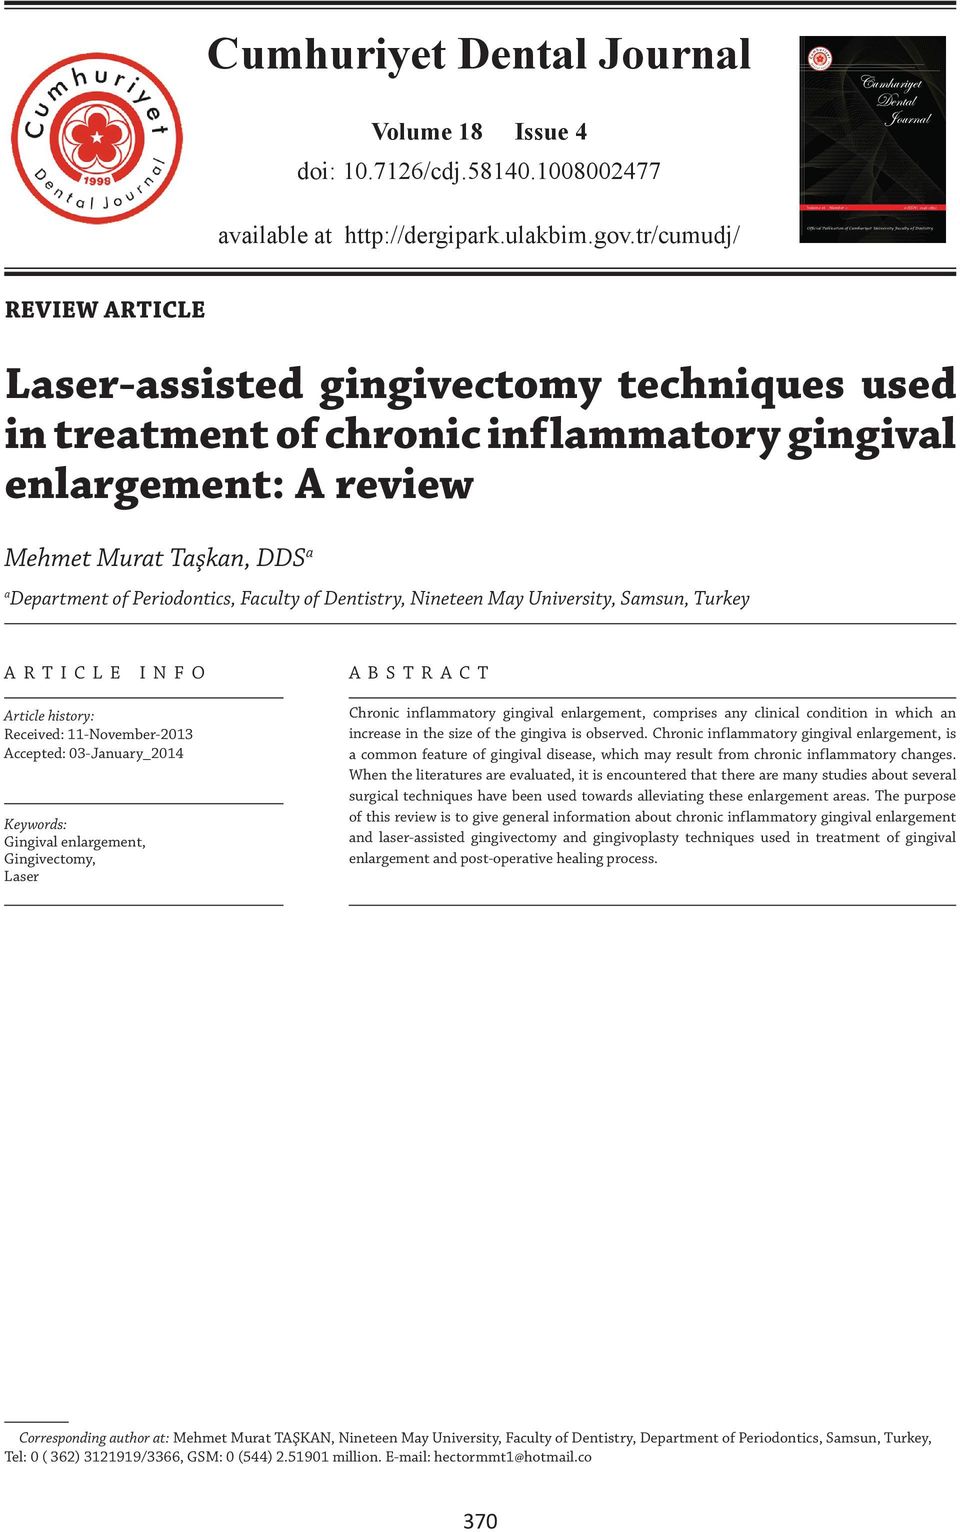 inflammatory gingival enlargement: A review Mehmet Murat Taşkan, DDS a a Department of Periodontics, Faculty of Dentistry, Nineteen May University, Samsun, Turkey ARTICLE INFO Article history: